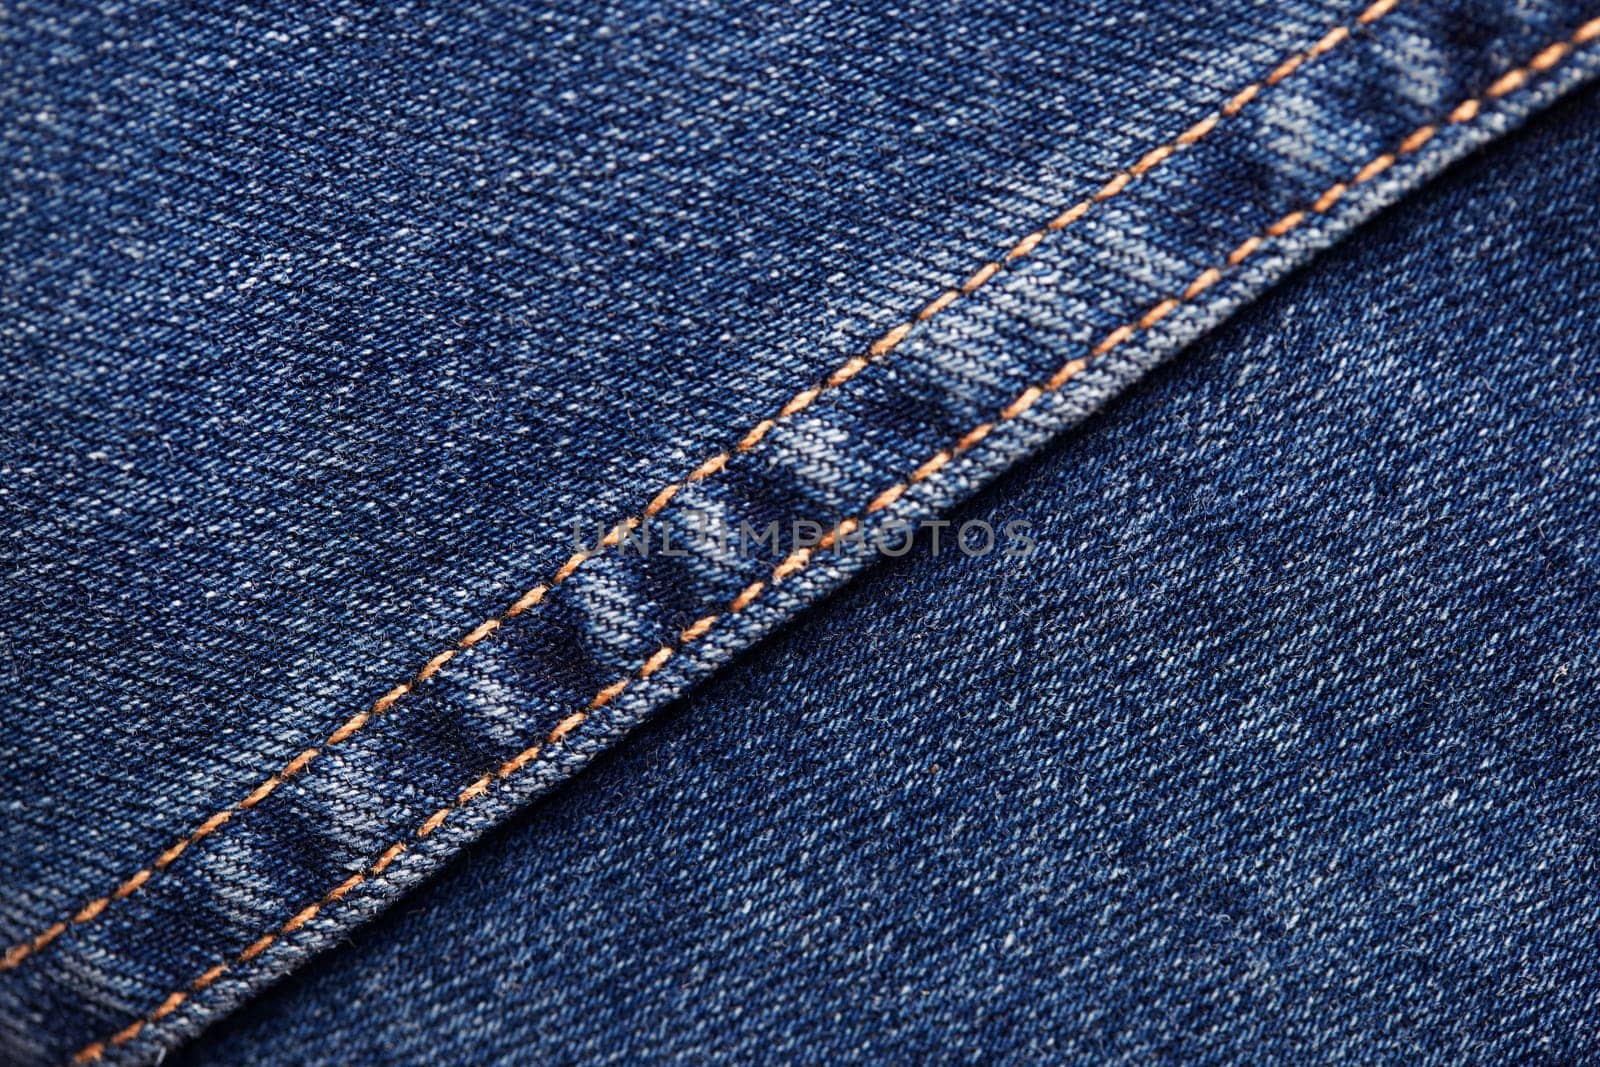 Seams on jeans close-up. Stitching on denim. Fabric texture. Blue jeans background and texture. Close up of blue jeans background. Denim texture in high-resolution.